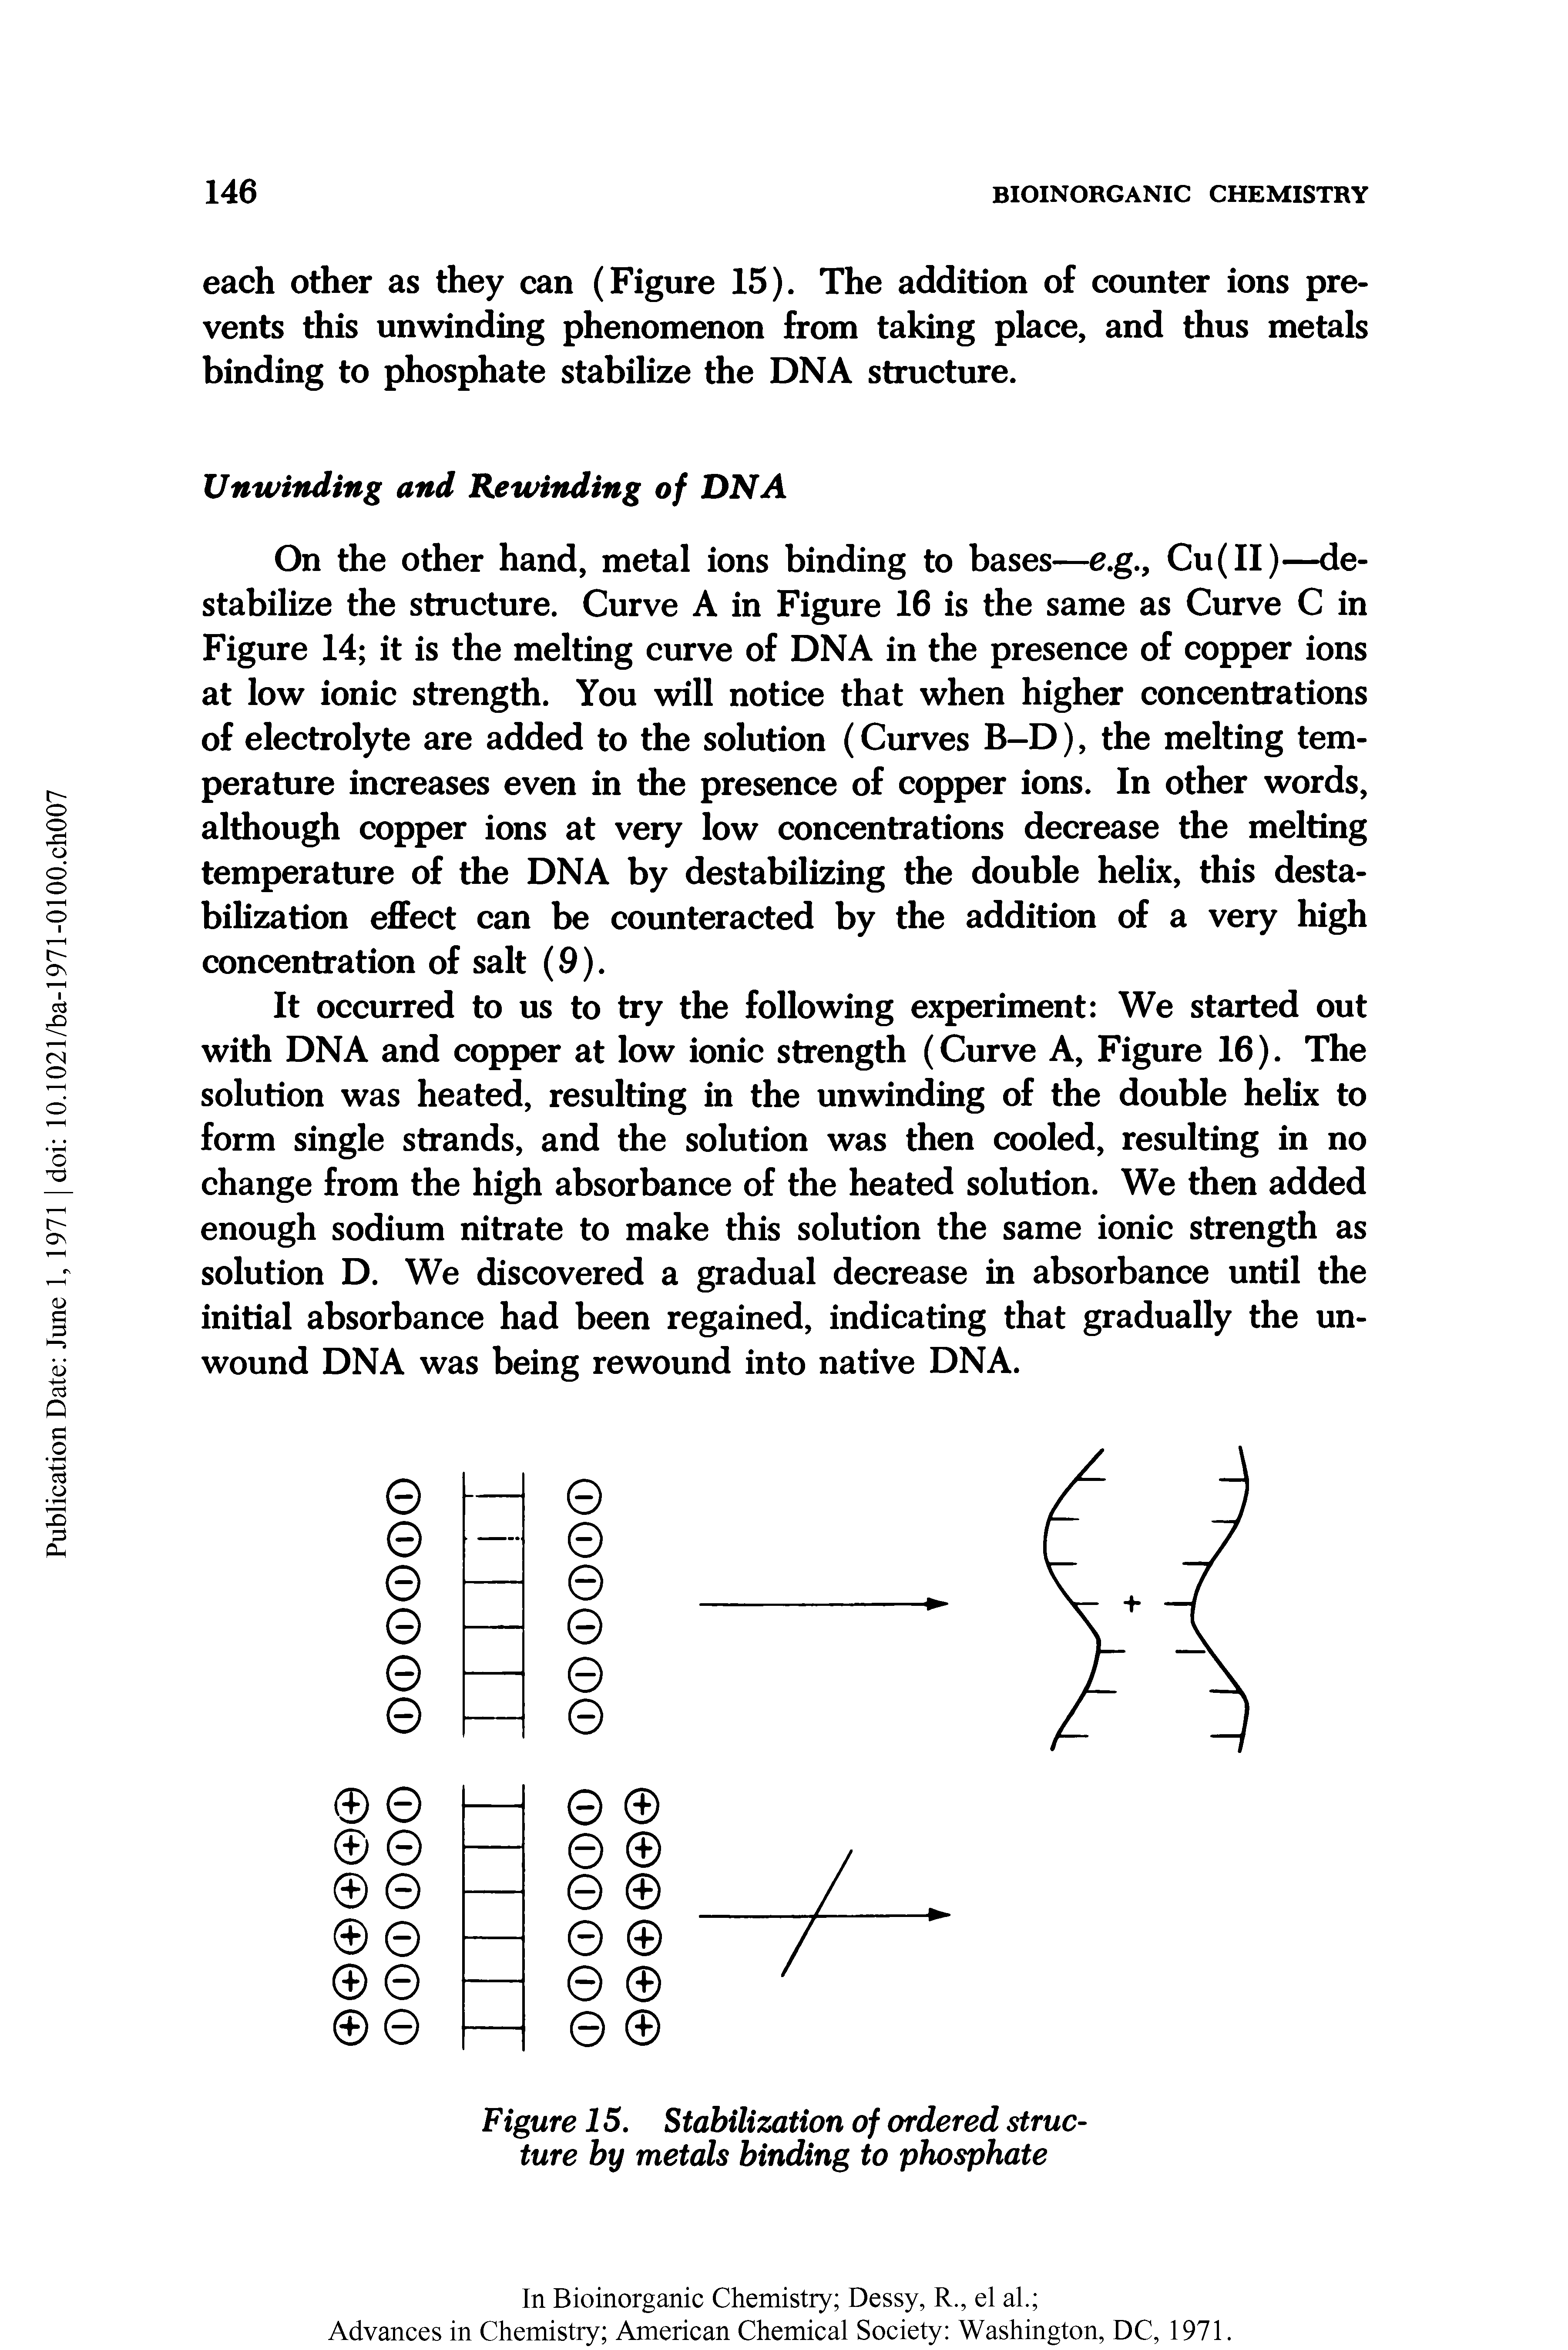 Figure 15. Stabilization of ordered structure by metals binding to phosphate...